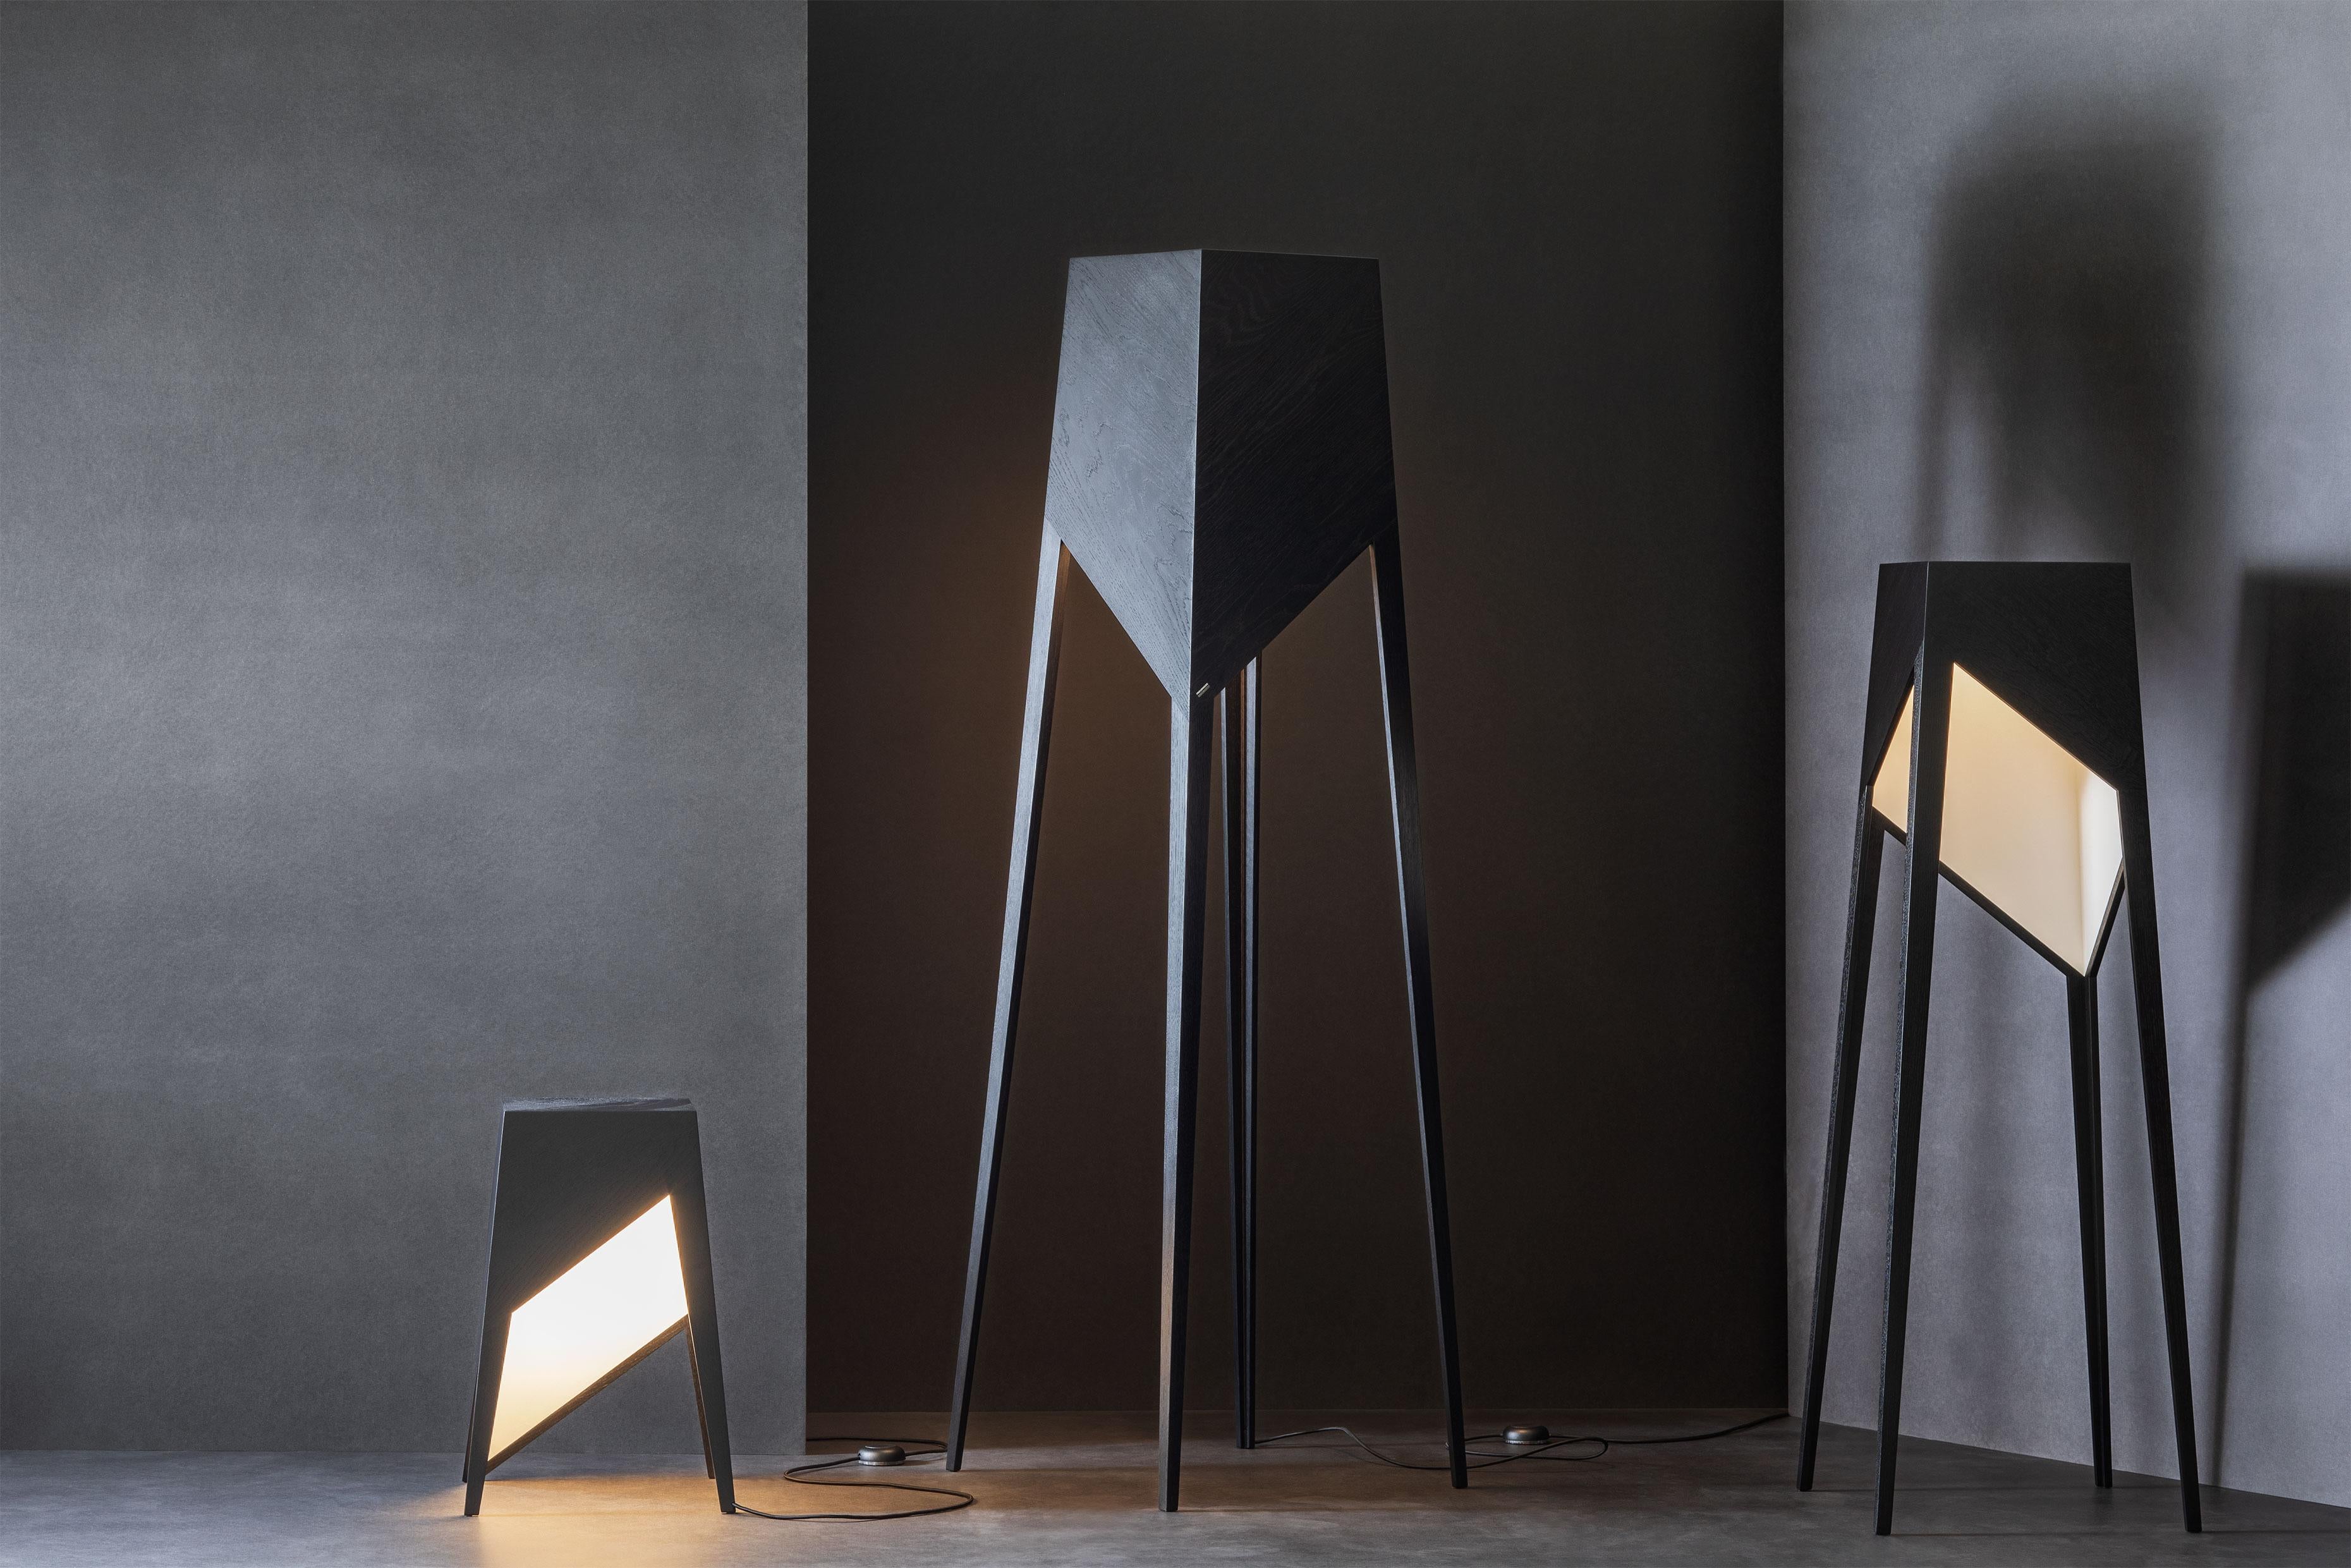 Set of 3 Luise floor lamp by Matthias Scherzinger
Dimensions: L 185 x 55 cm
 M 140 x 48 cm
 S 58 x 39 cm
Materials: oak: black stained hard wax
All our lamps can be wired according to each country. If sold to the USA it will be wired for the